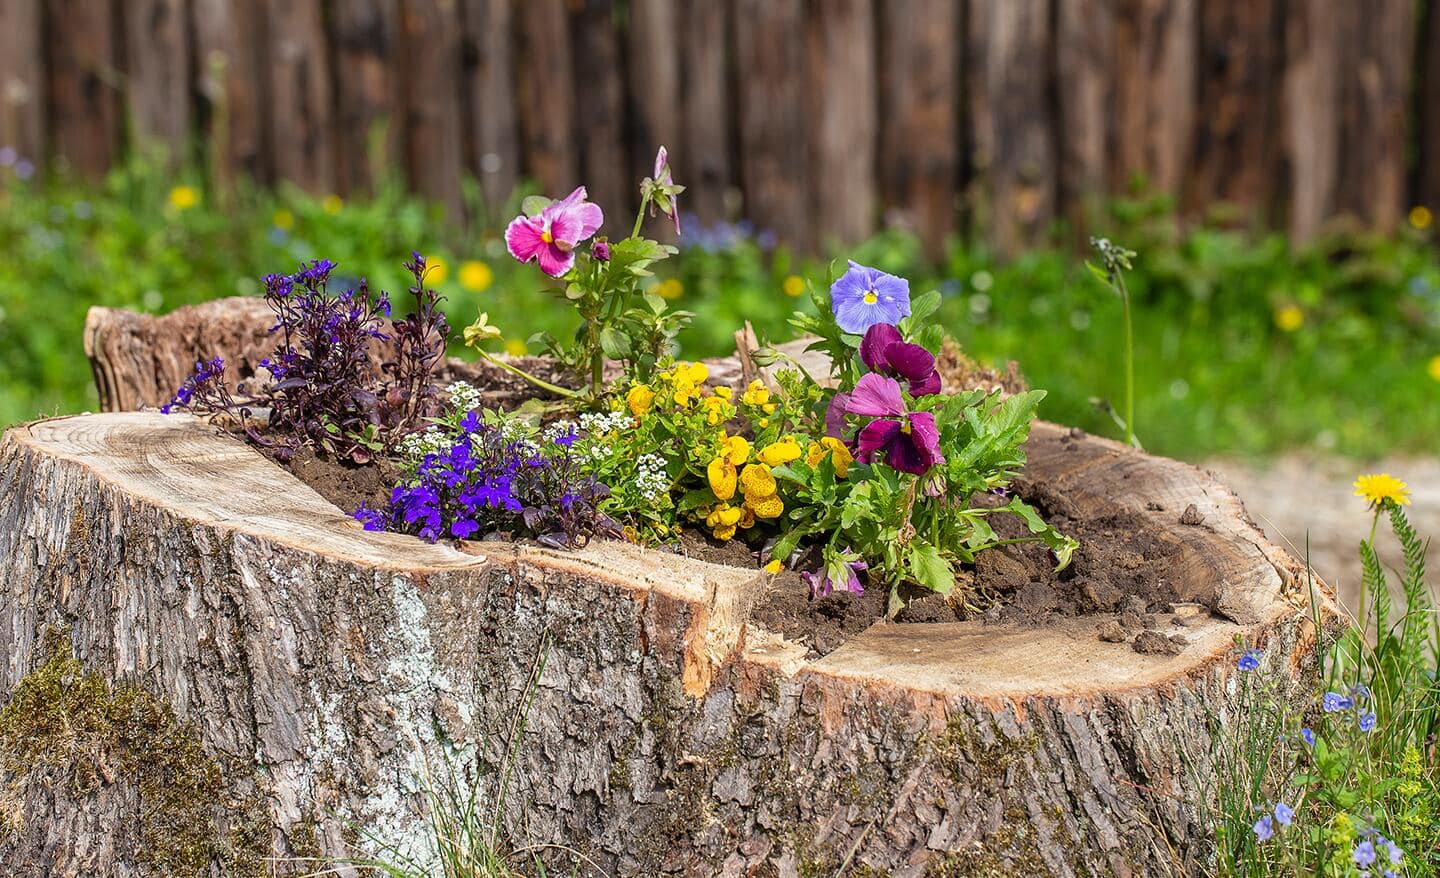 A old stump becomes a planter for flowers.